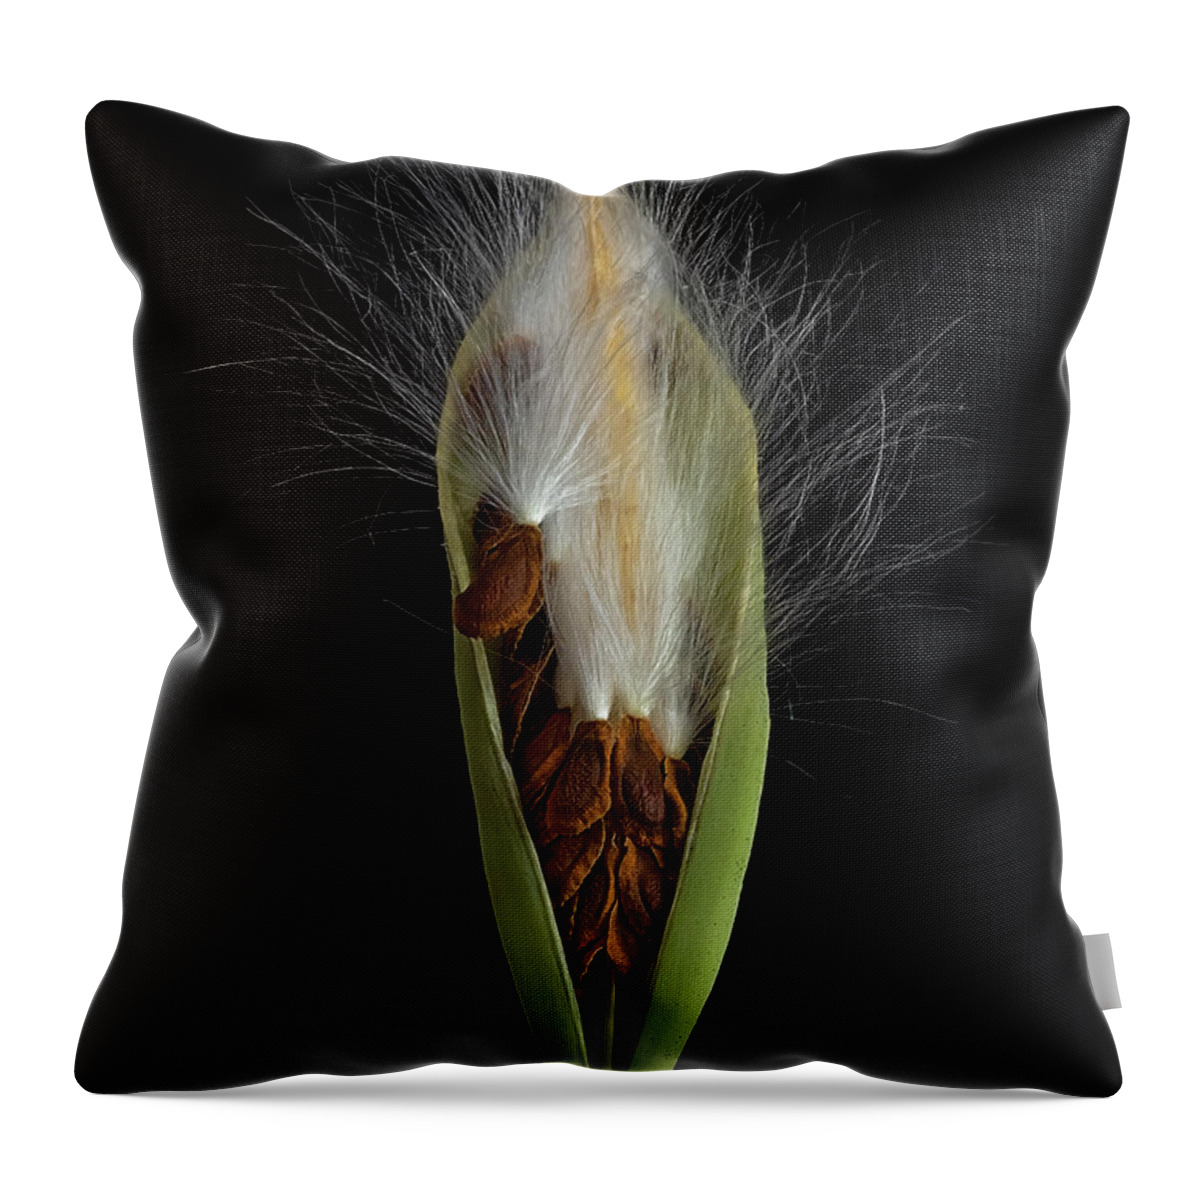 Milkweed Throw Pillow featuring the photograph Milkweed Pod 2 by Endre Balogh